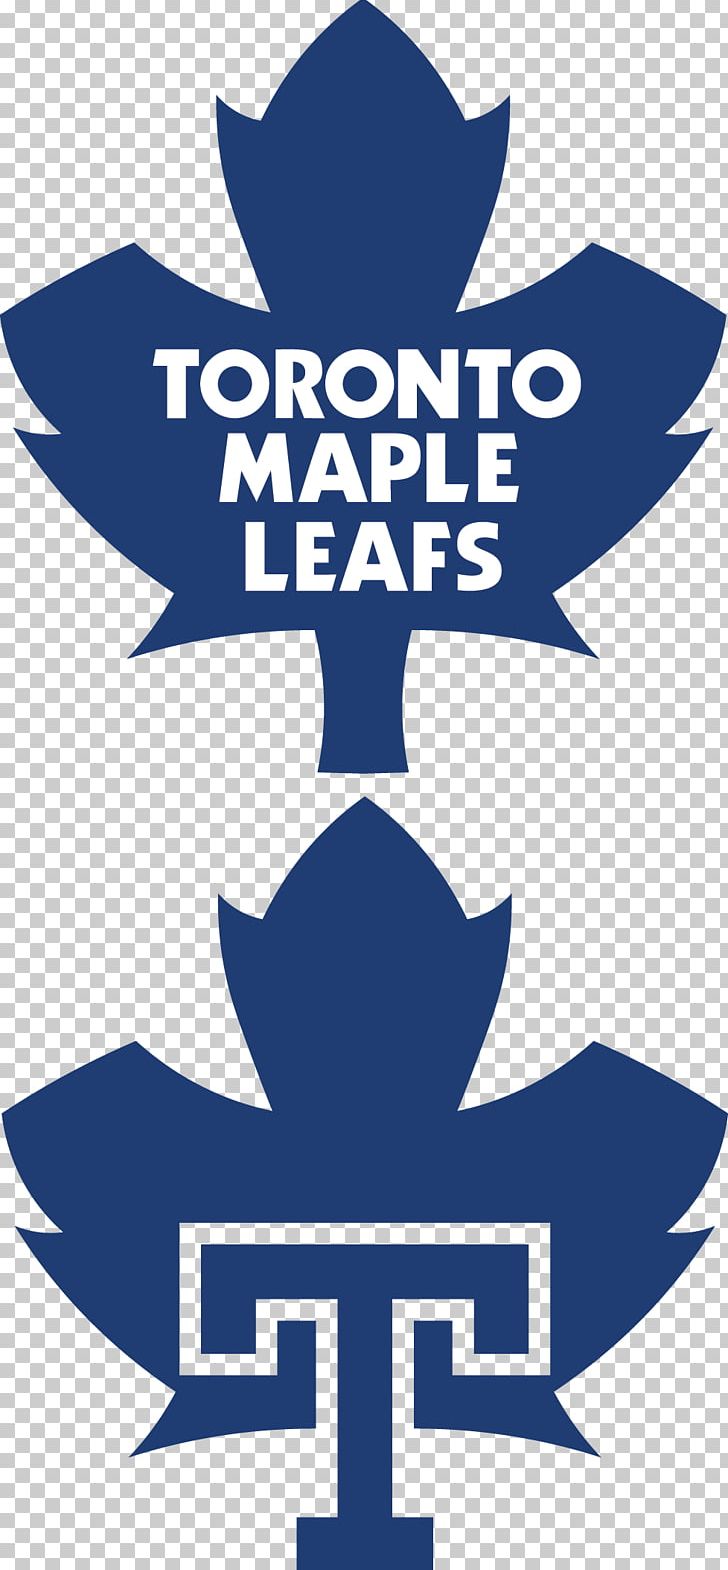 Toronto Maple Leafs National Hockey League Scotiabank Arena St. John's Maple Leafs Toronto Marlies PNG, Clipart,  Free PNG Download